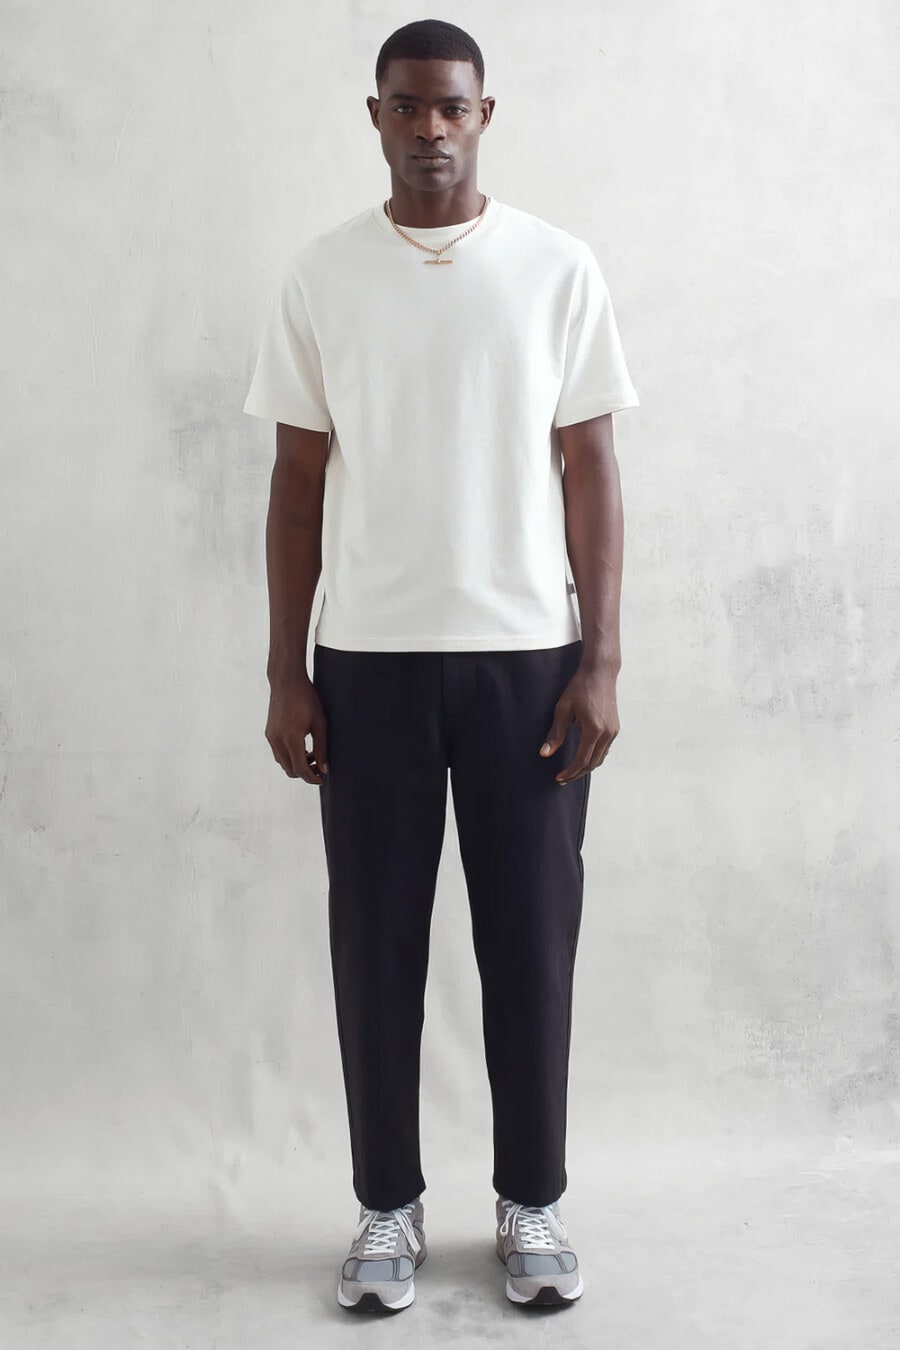 Men's black tapered pants, heavyweight white T-shirt, gold pendant necklace and grey New Balance sneakers outfit